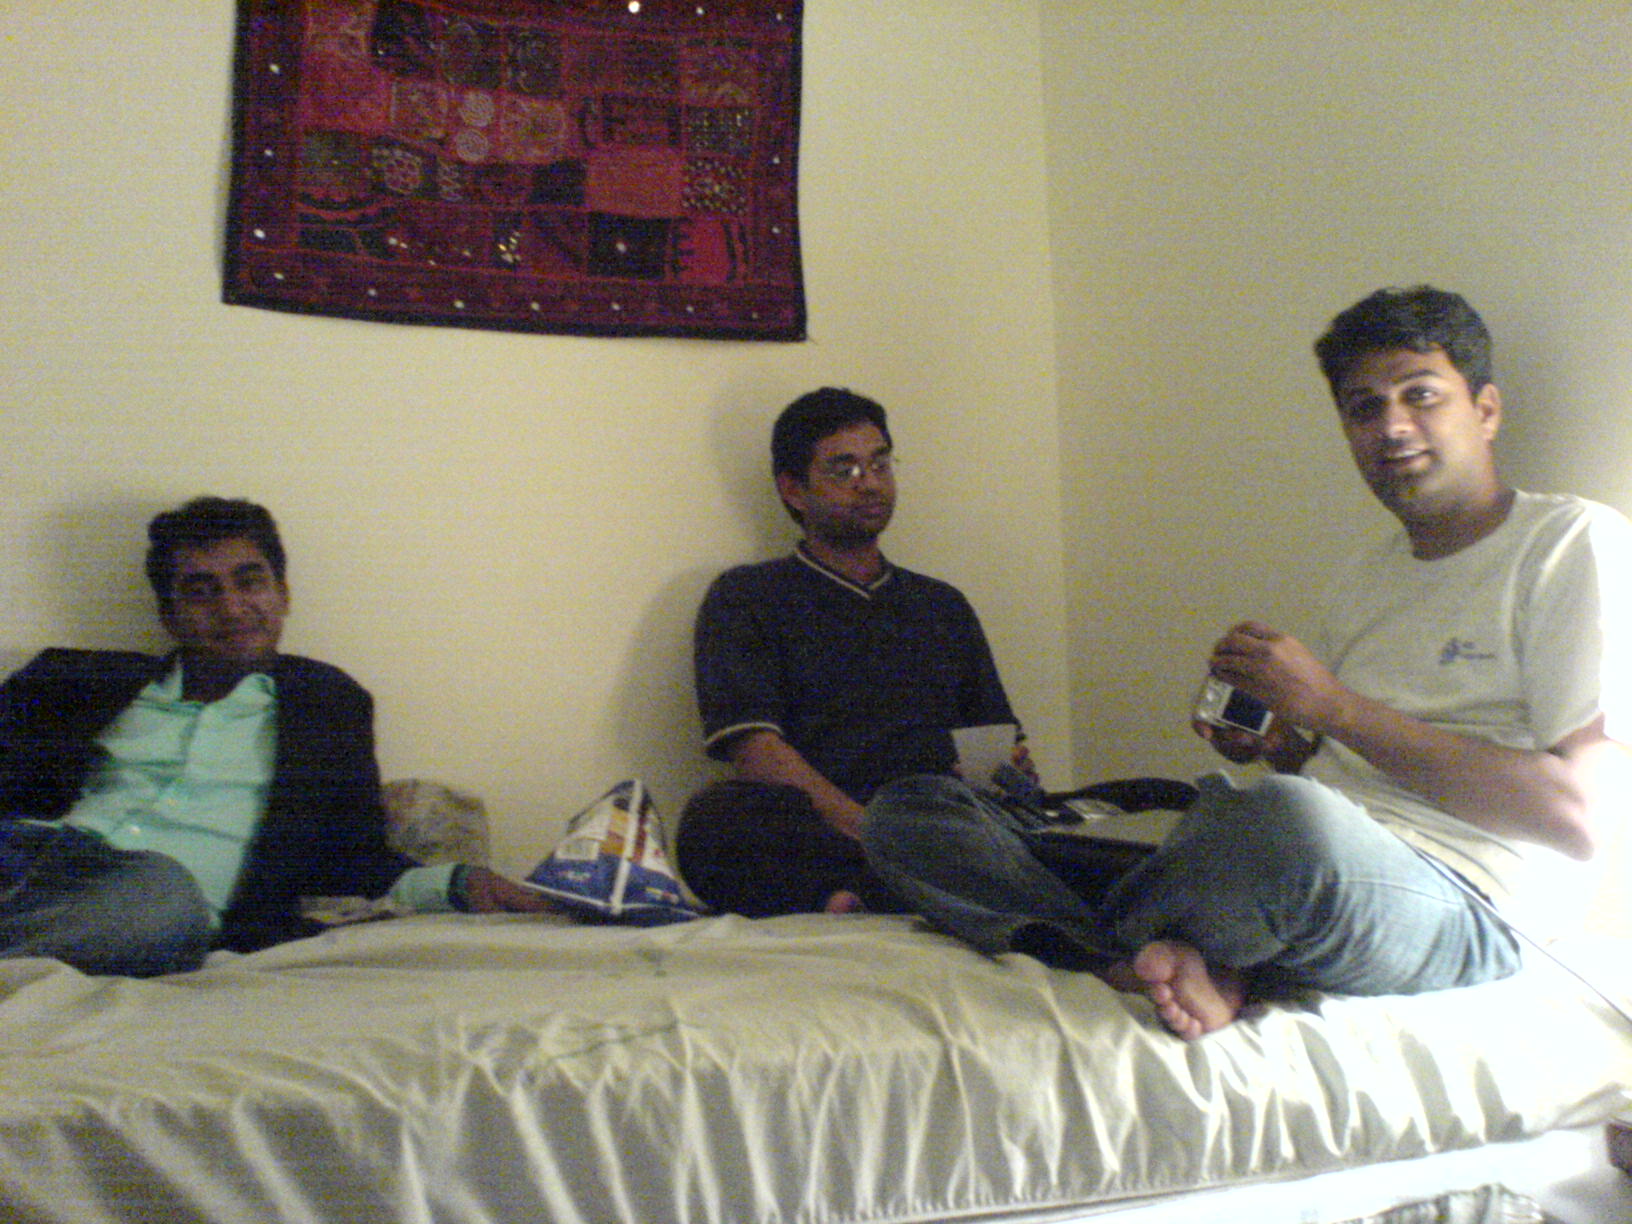 three people on a bed with food in their hand